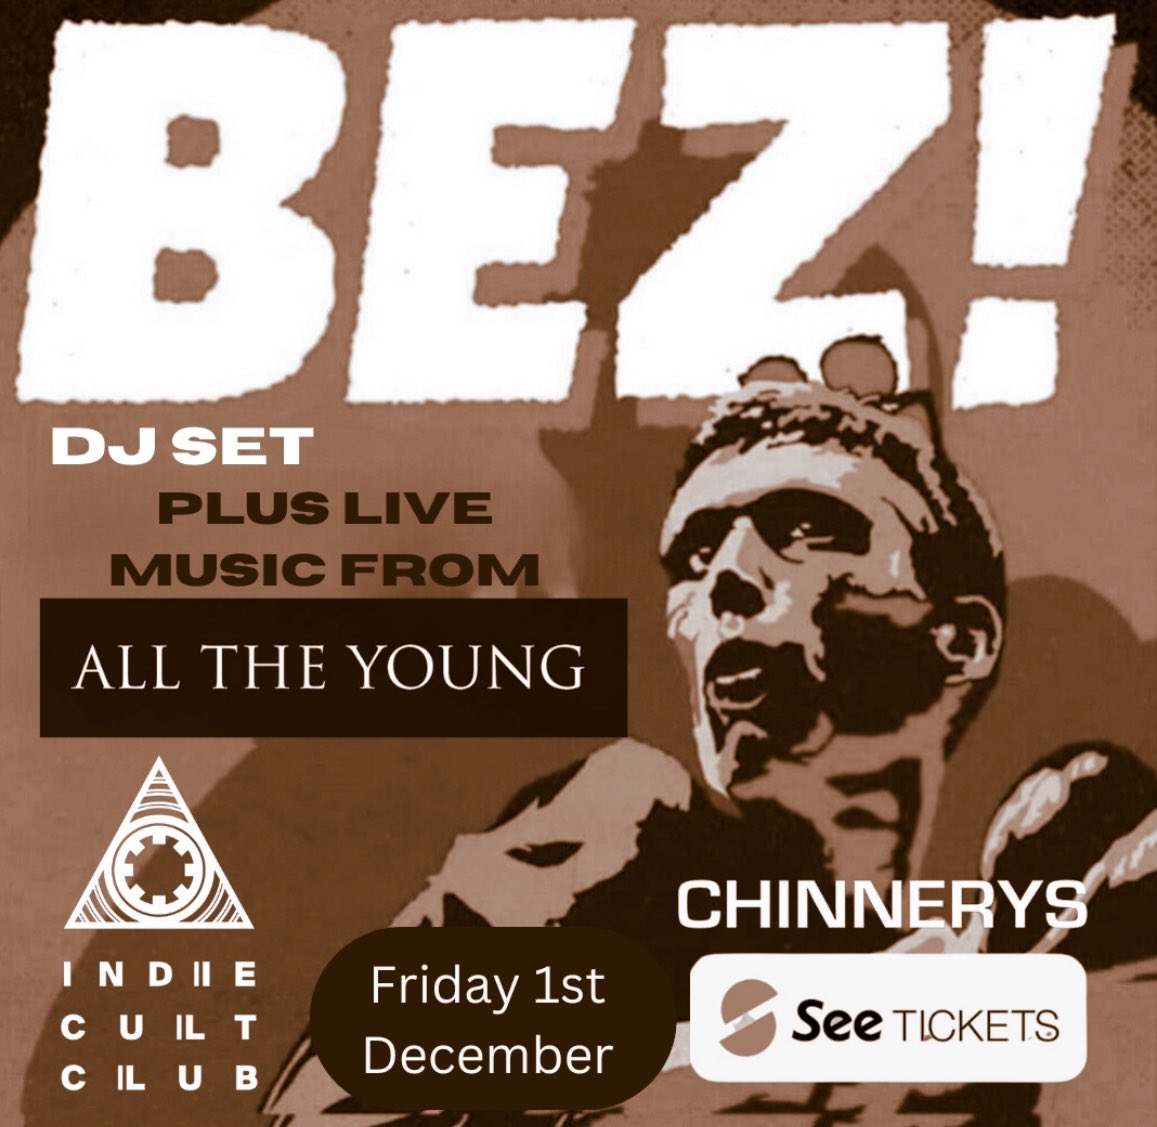 We’ll be playing at @chinnerys_southend with the legend that is @bezmondays on December 1st as part of our UK run! Tickets below! Twisting me Melon man! 🍉 🍋 #Southend #Southendonsea #Essex 🇬🇧

seetickets.com/event/indie-cu…